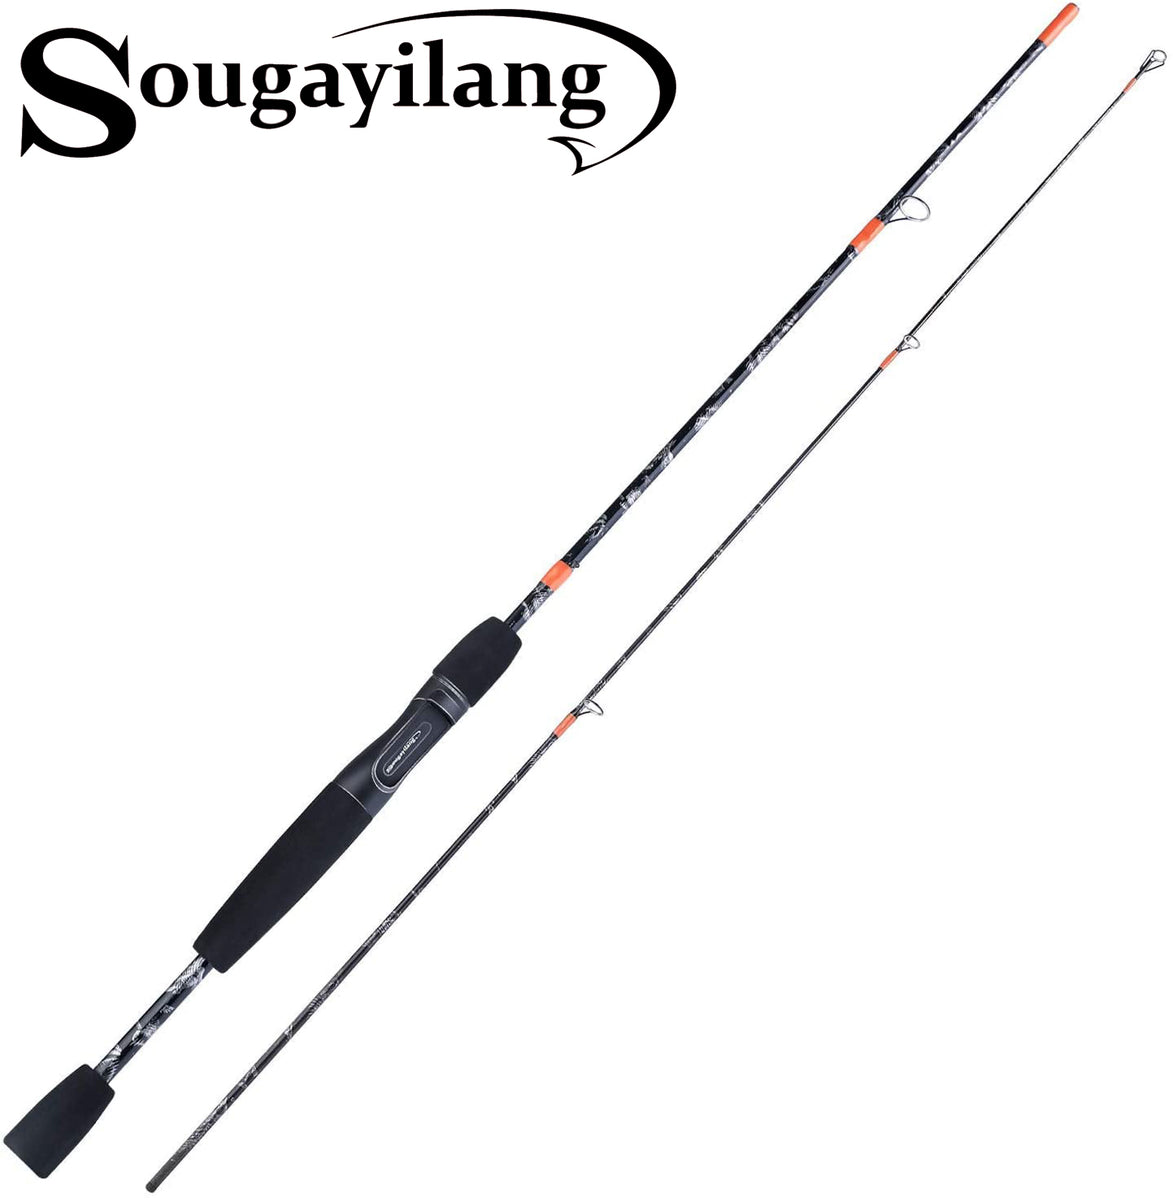 Sougayilang Baitcasting and Spinning Fishing Rod 1.8m 2 Sections Carbon  Fiber ABS Reel Seat Cork